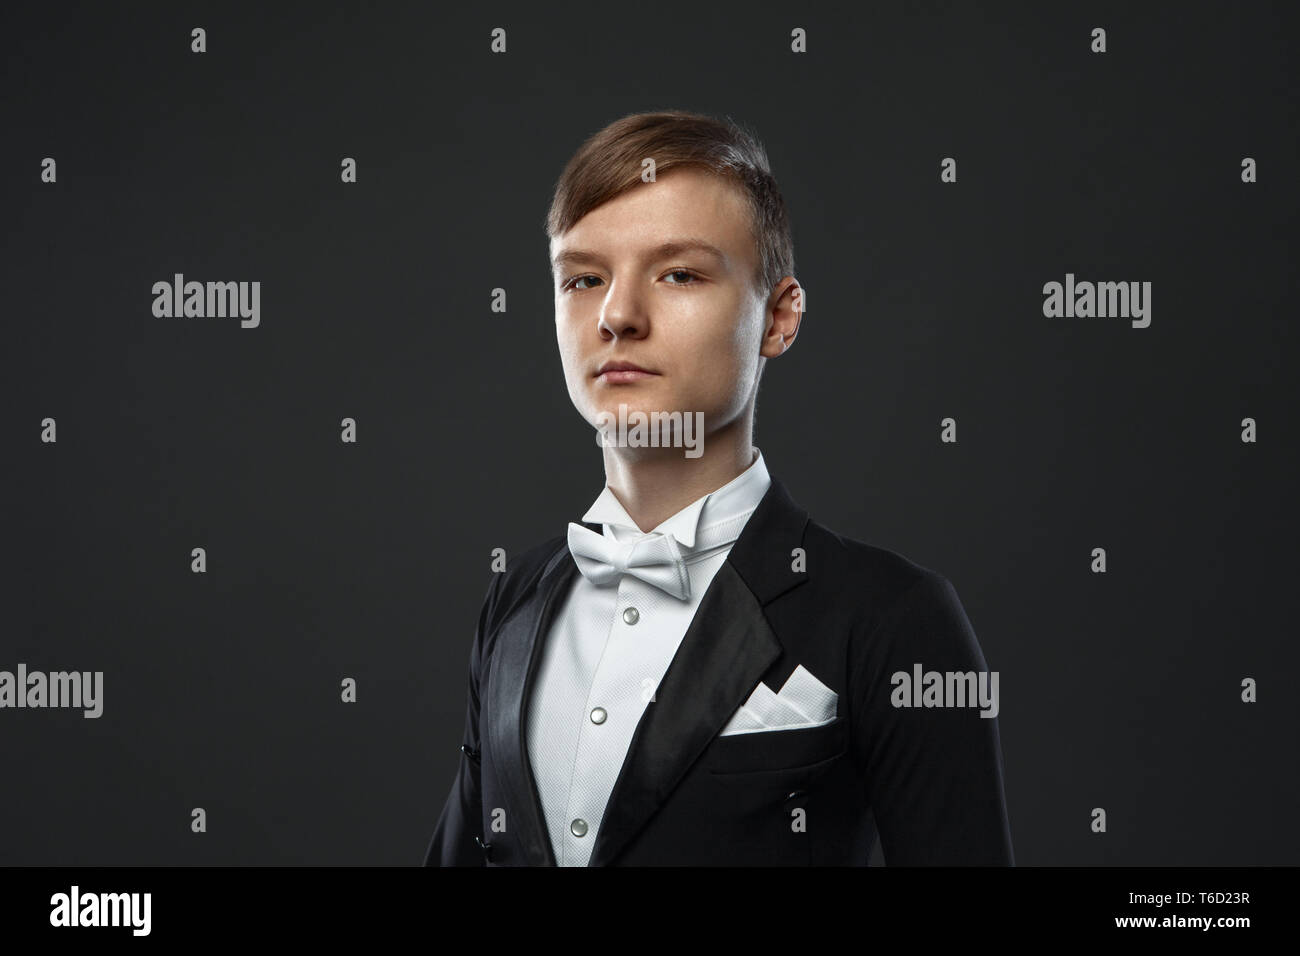 teenage boy in suit on a black background Stock Photo